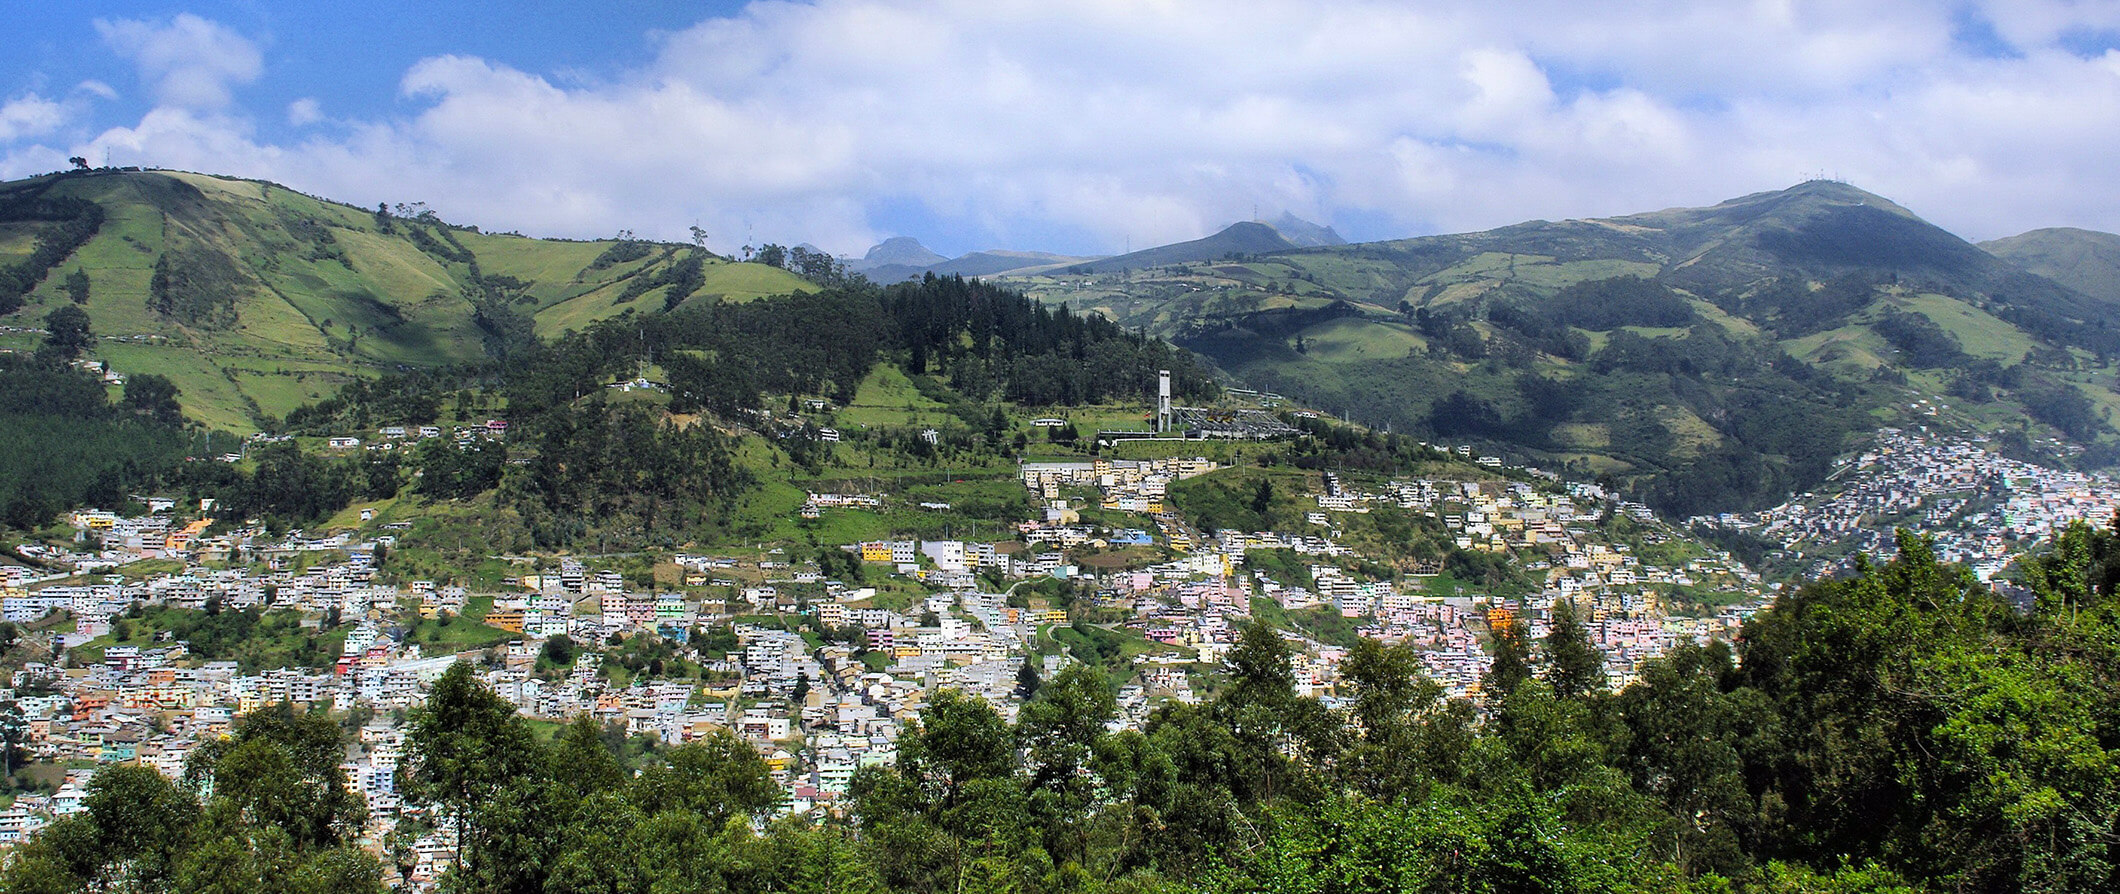 Image of a city in Ecuador surrounded by mountains